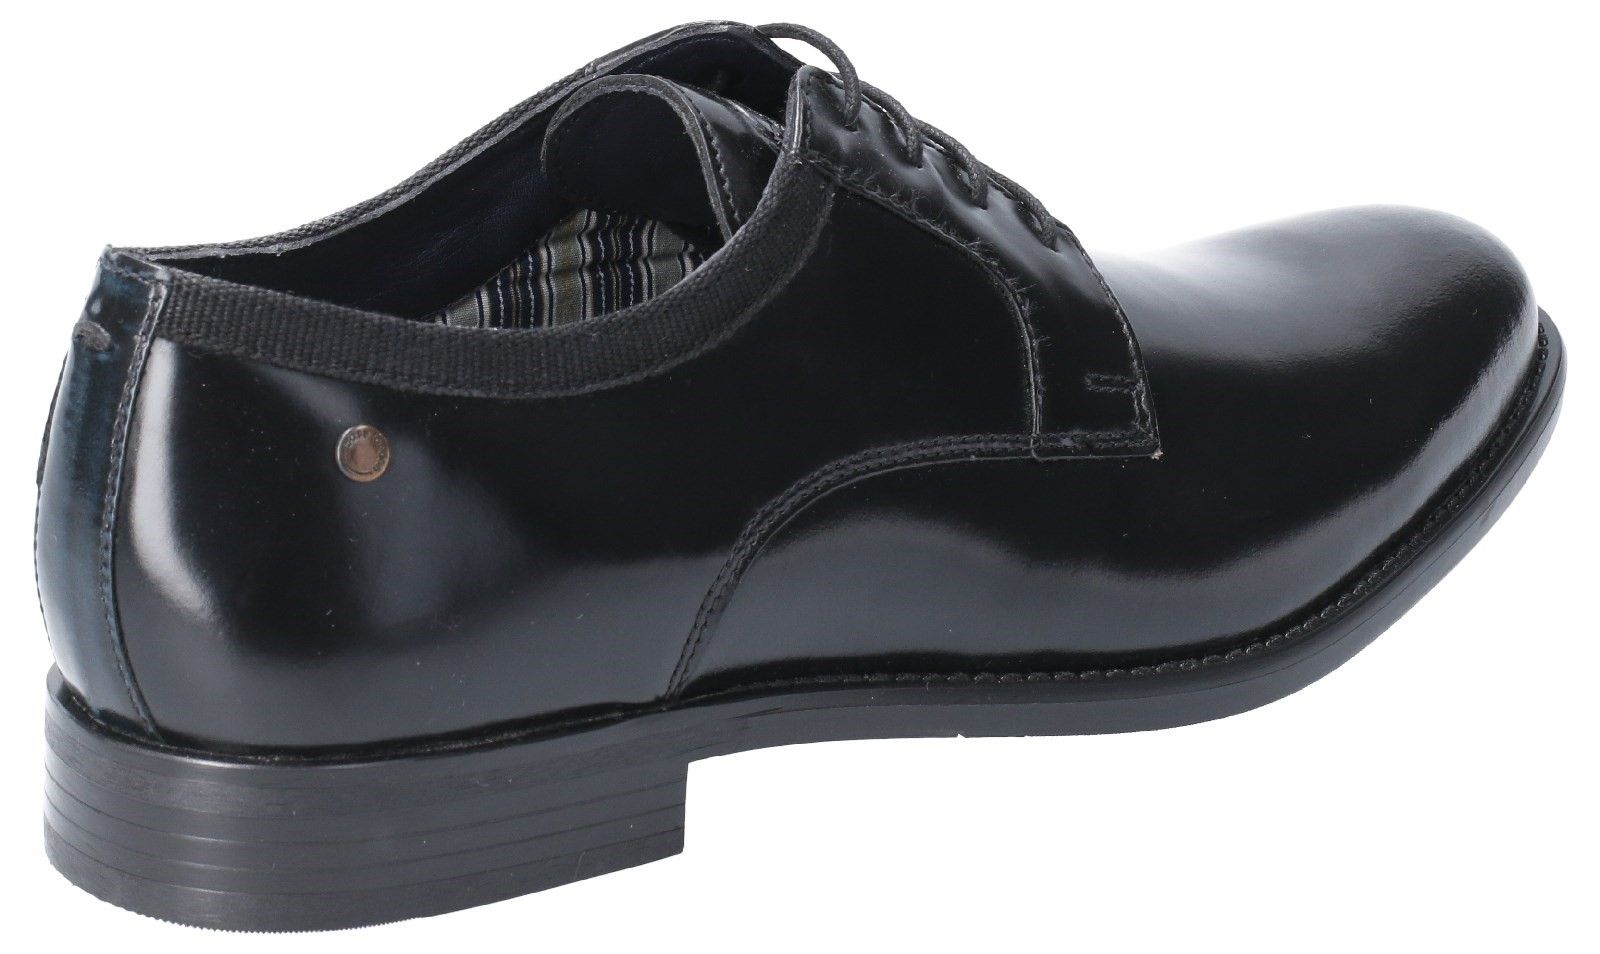 Nero Hi Shine is a crisp statement shoe from our new Base London Vino collection. With its prominent resin outsole, this Nero Oxford shoe offers a nostalgic nod to vintage style, whilst delivering a fashion forward contemporary feel. Derby Shoe. 
Resin Sole.